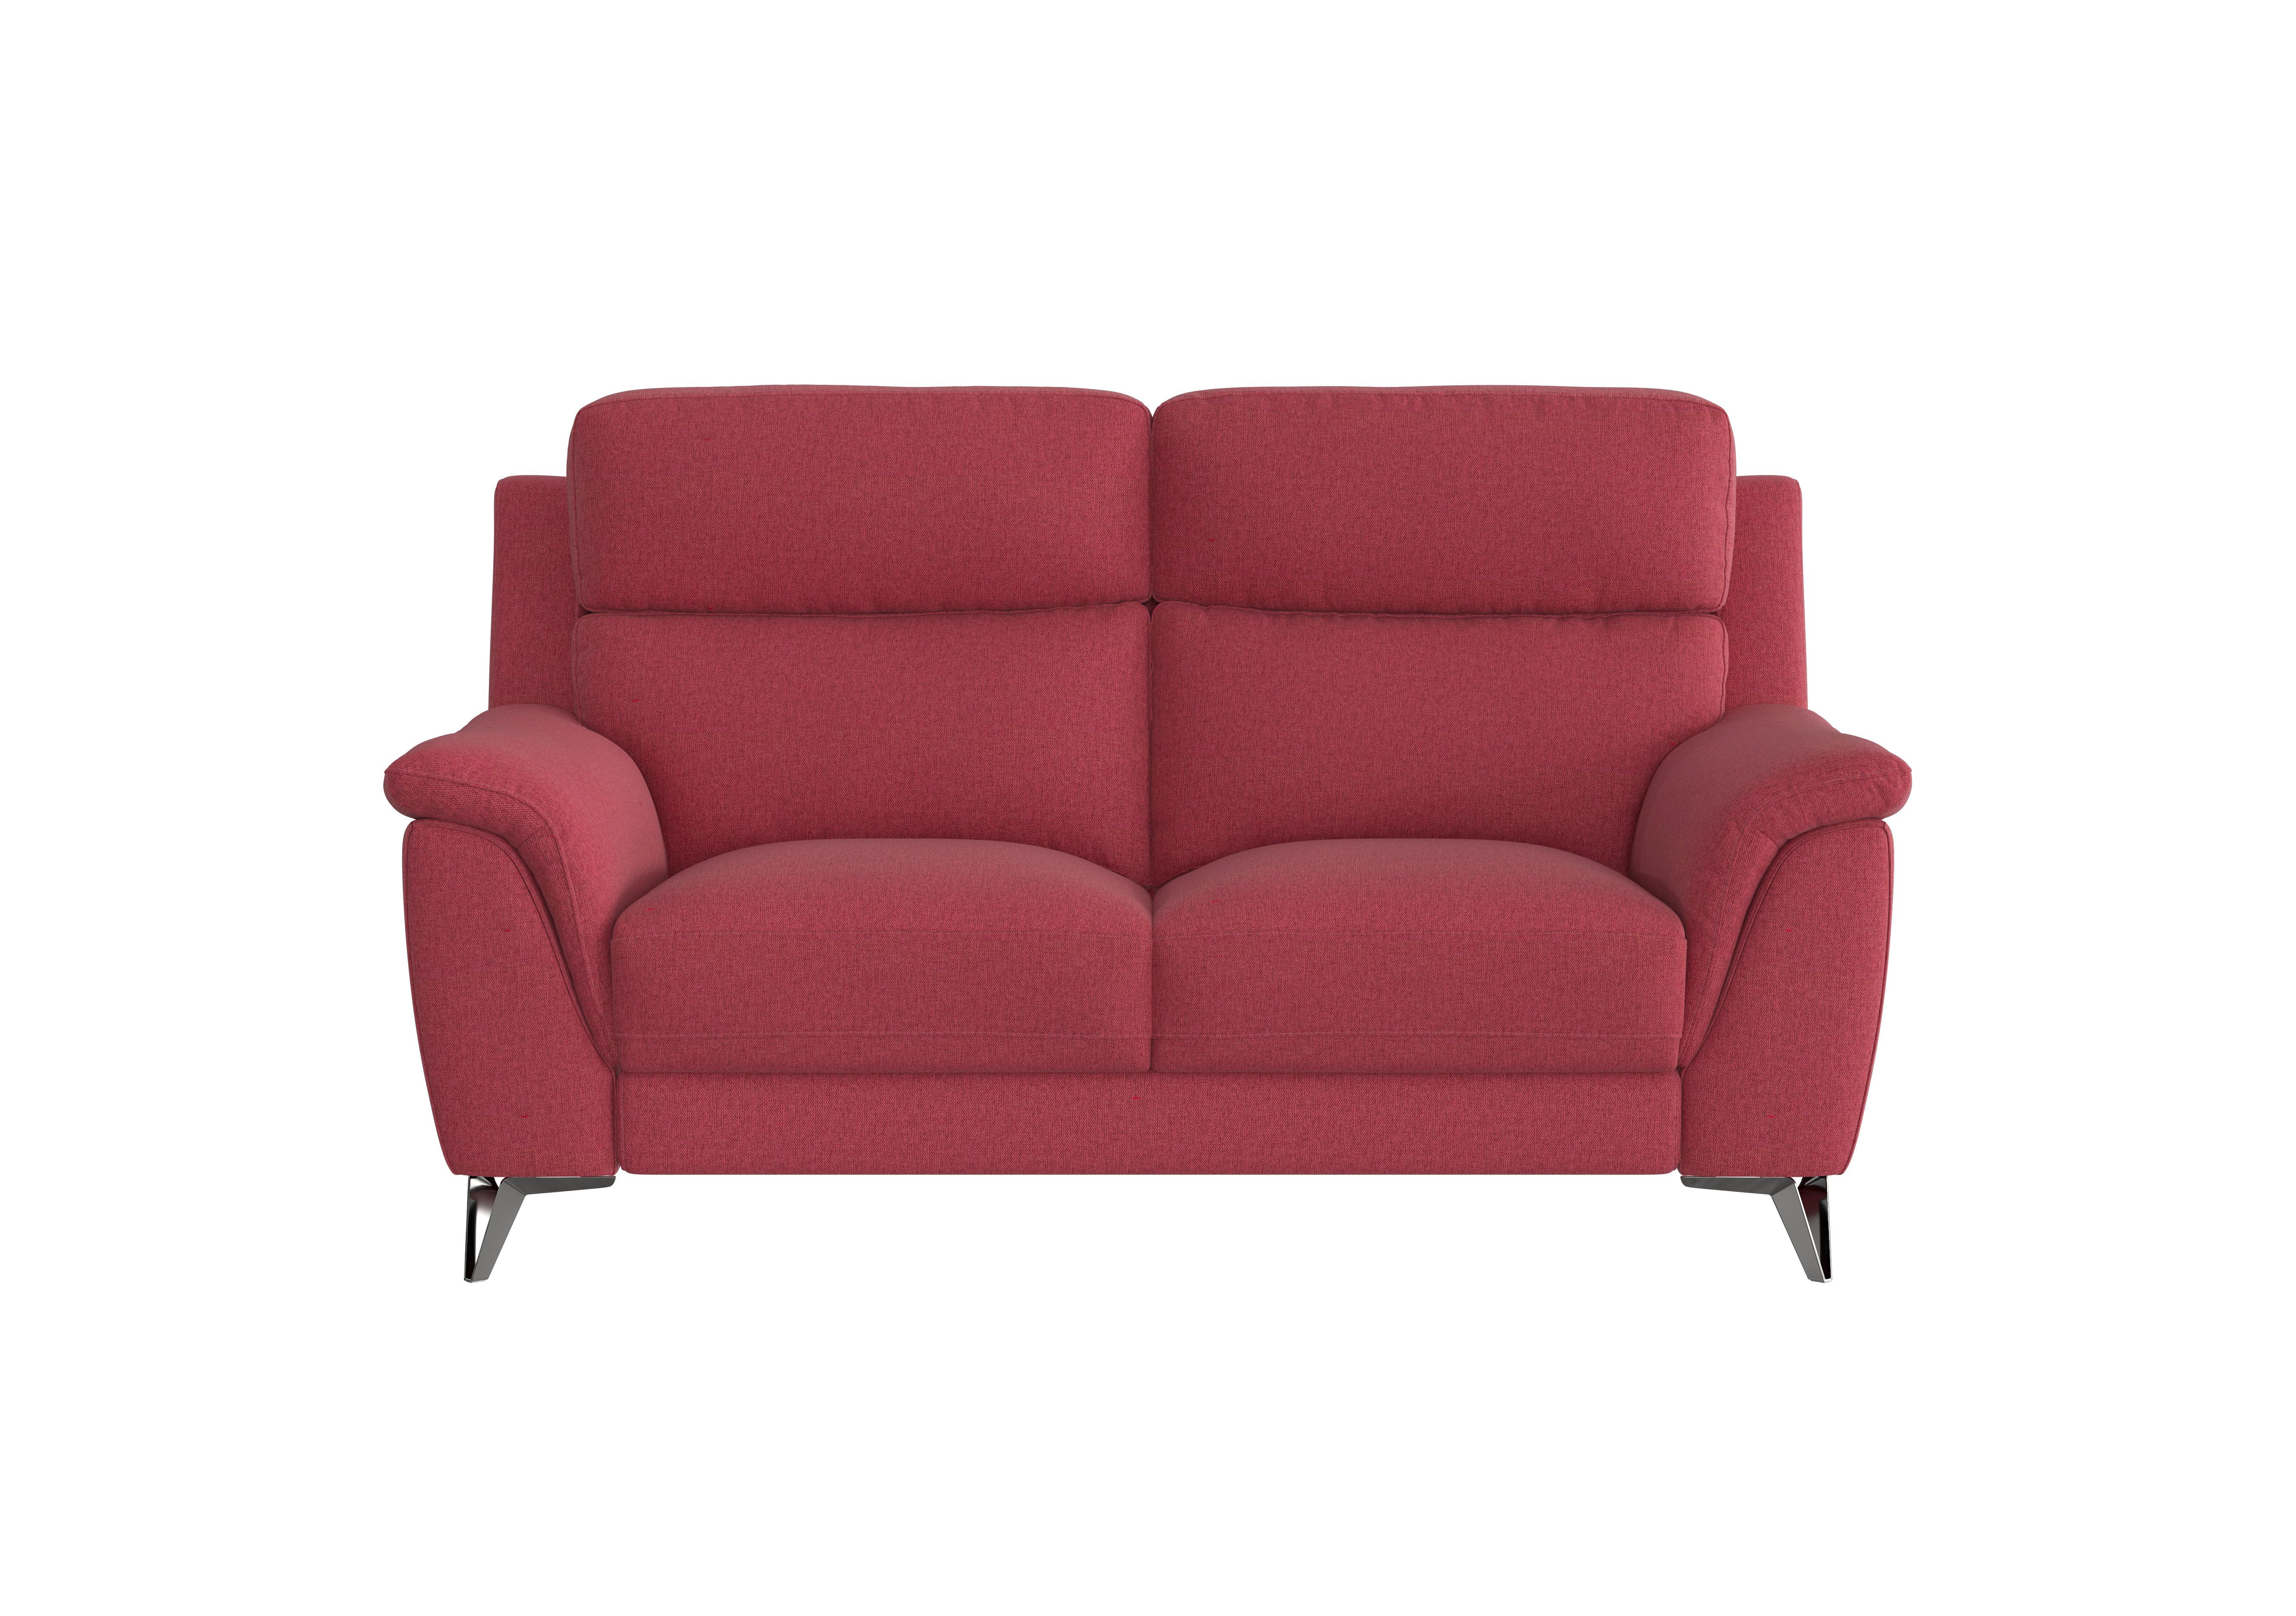 Contempo 2 Seater Fabric Sofa in Fab-Blt-R29 Red on Furniture Village